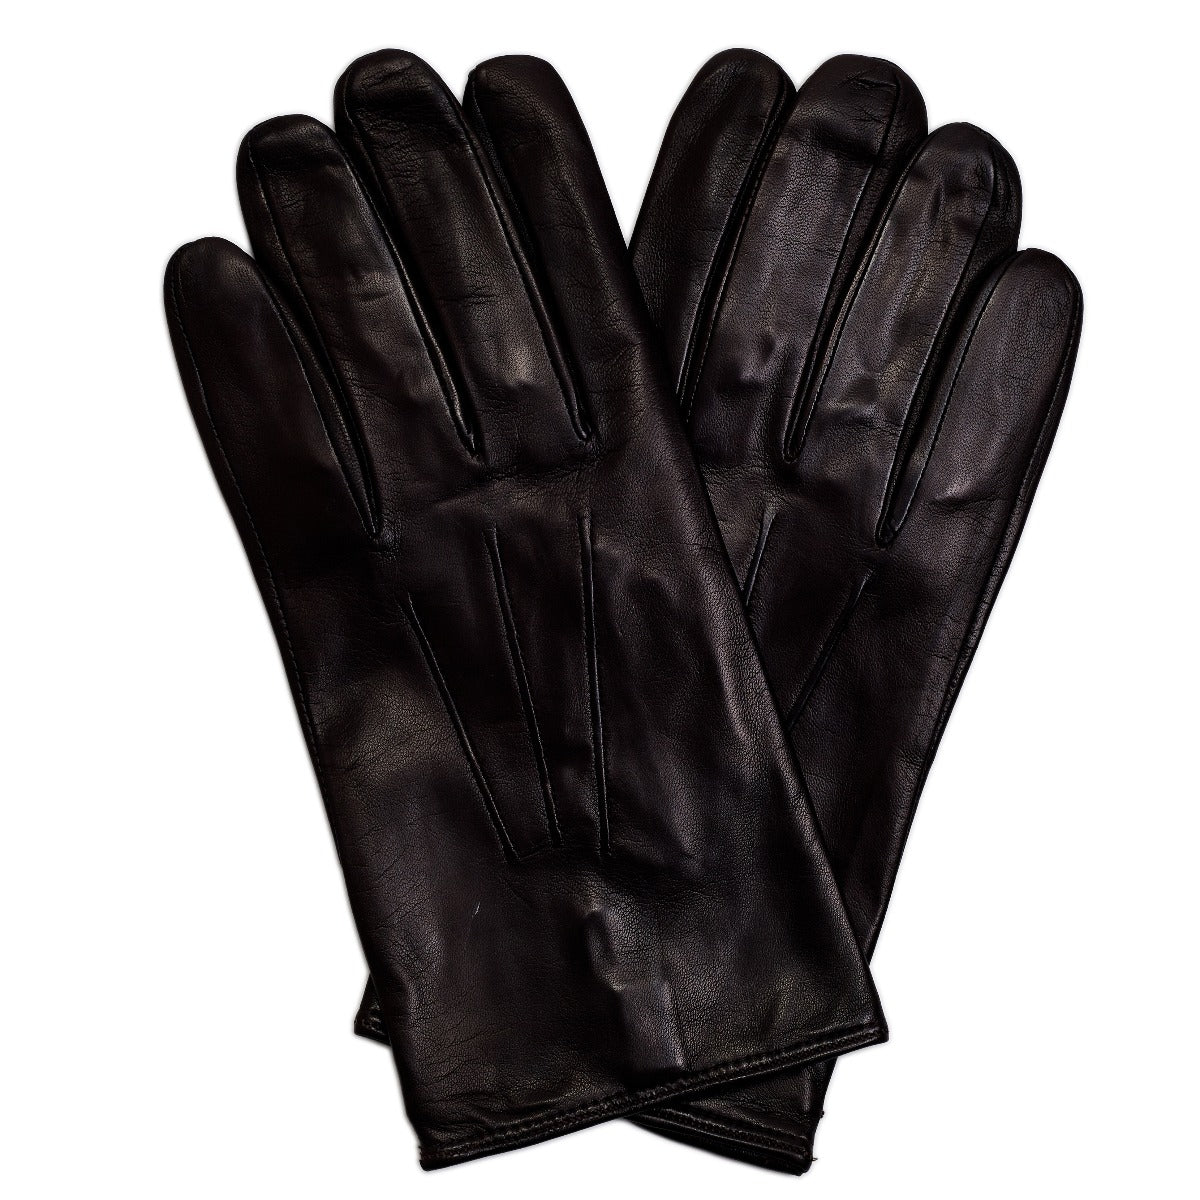 Sovereign Grade Dark Brown Nappa Leather Gloves, Silk Lined